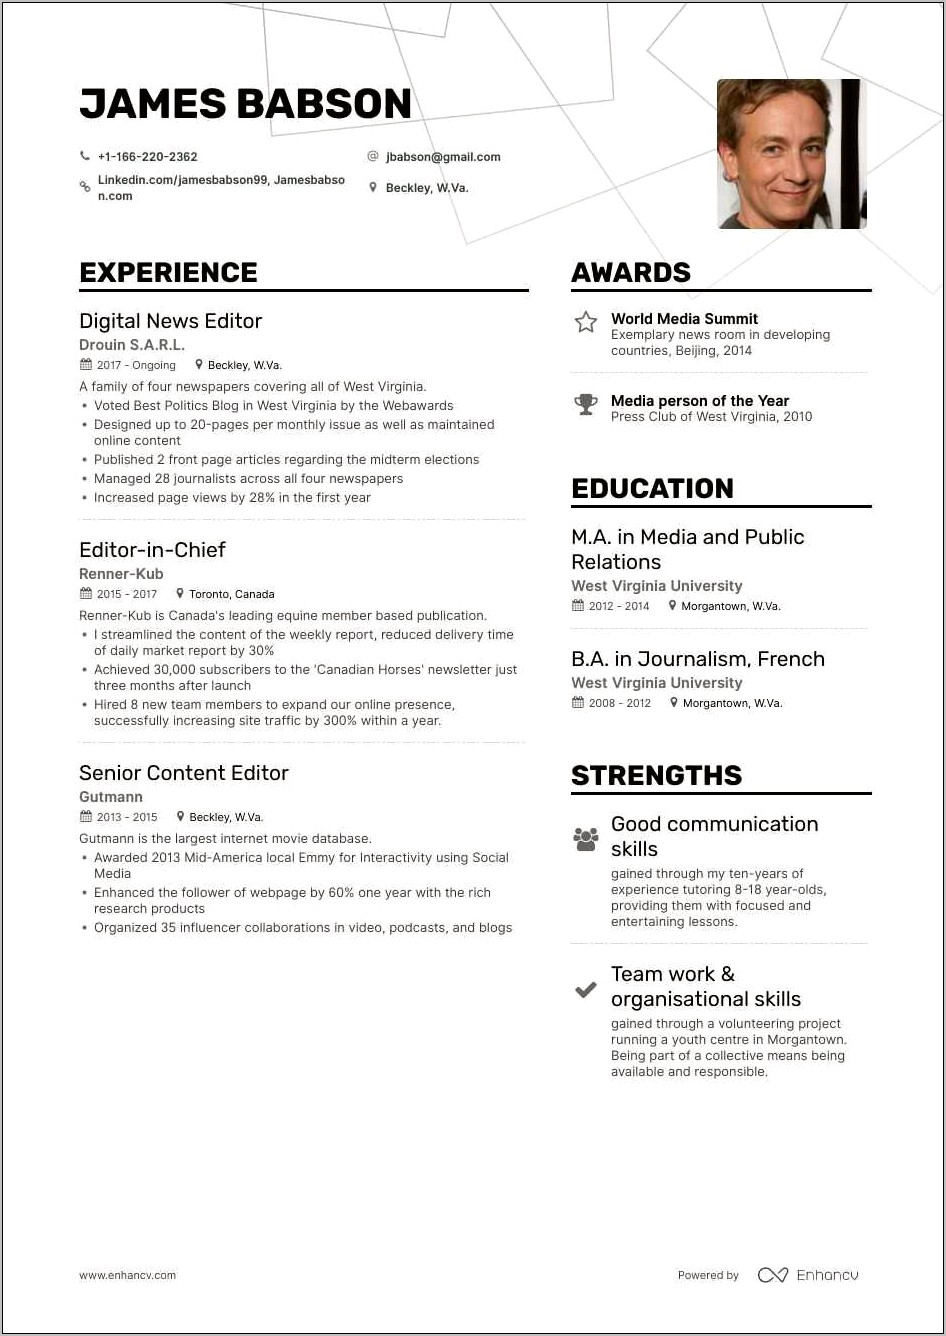 Resume Objectives Examples For Content Editor